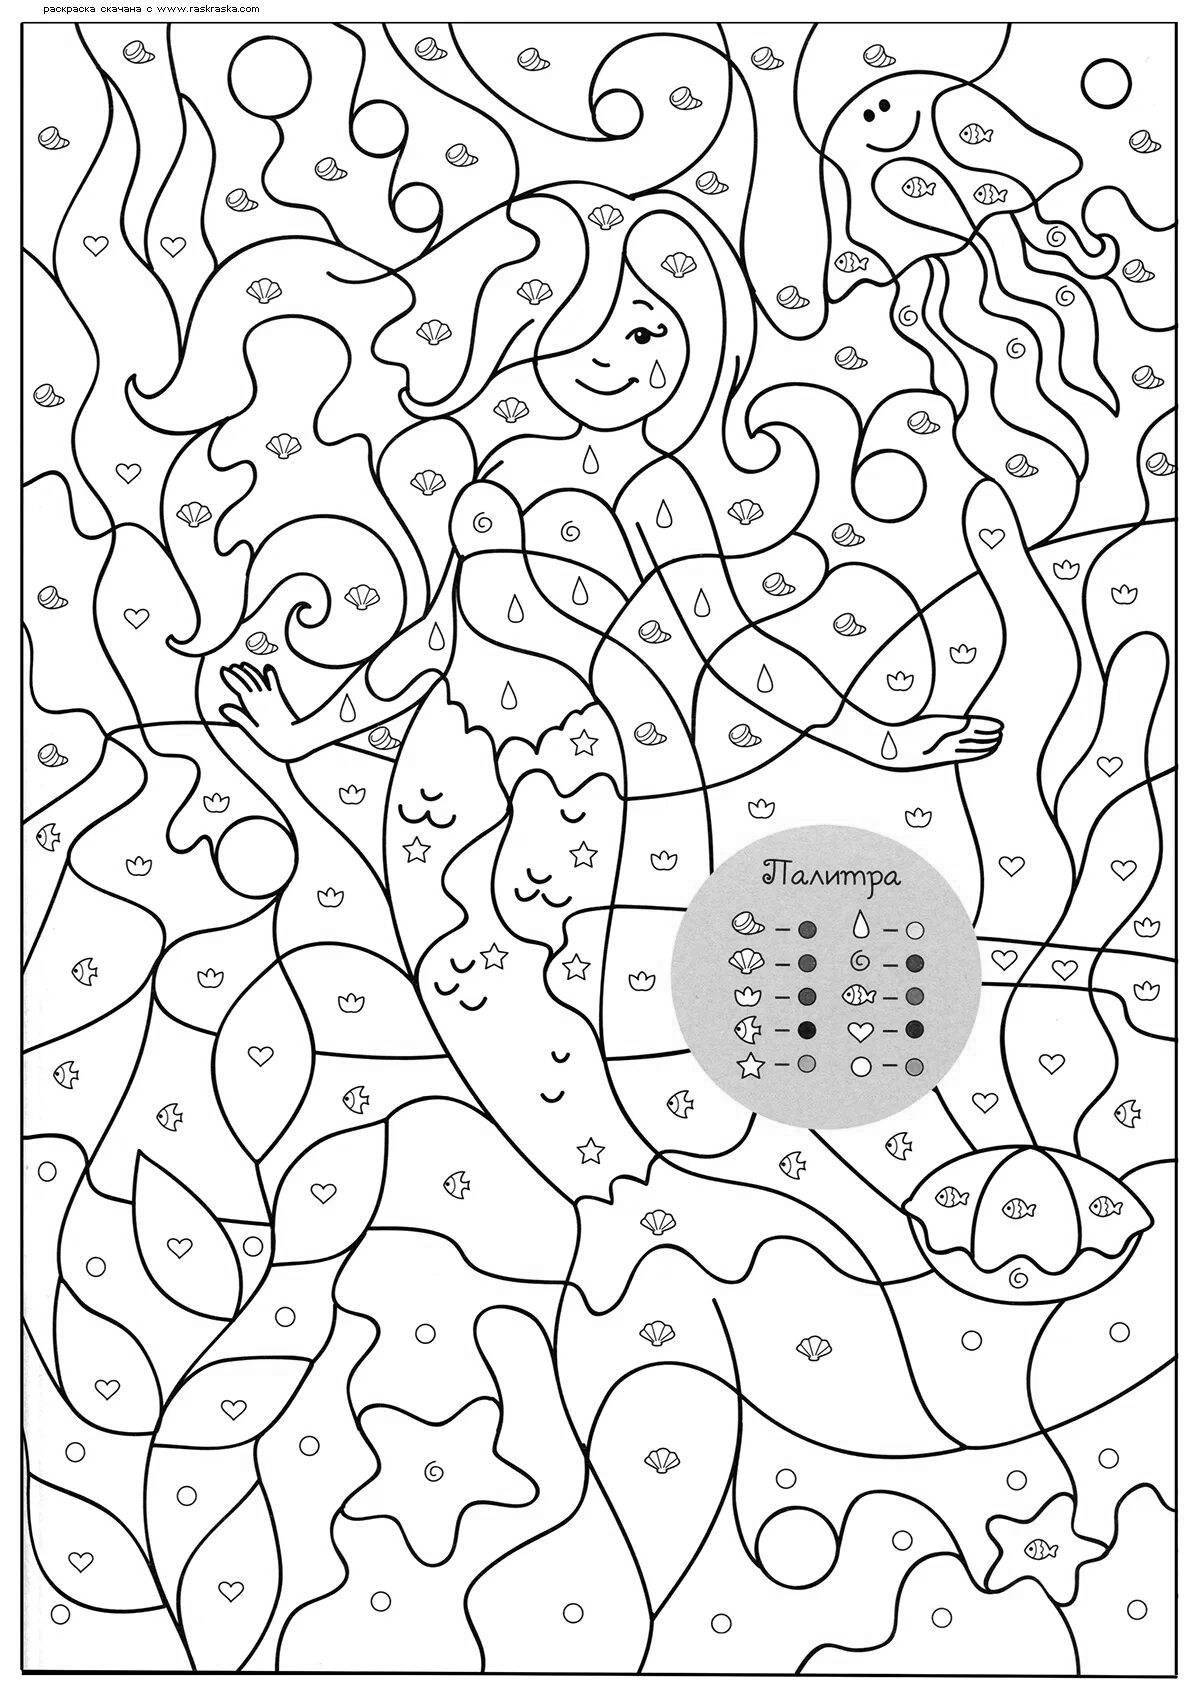 Color-explosive coloring page by symbols for kids